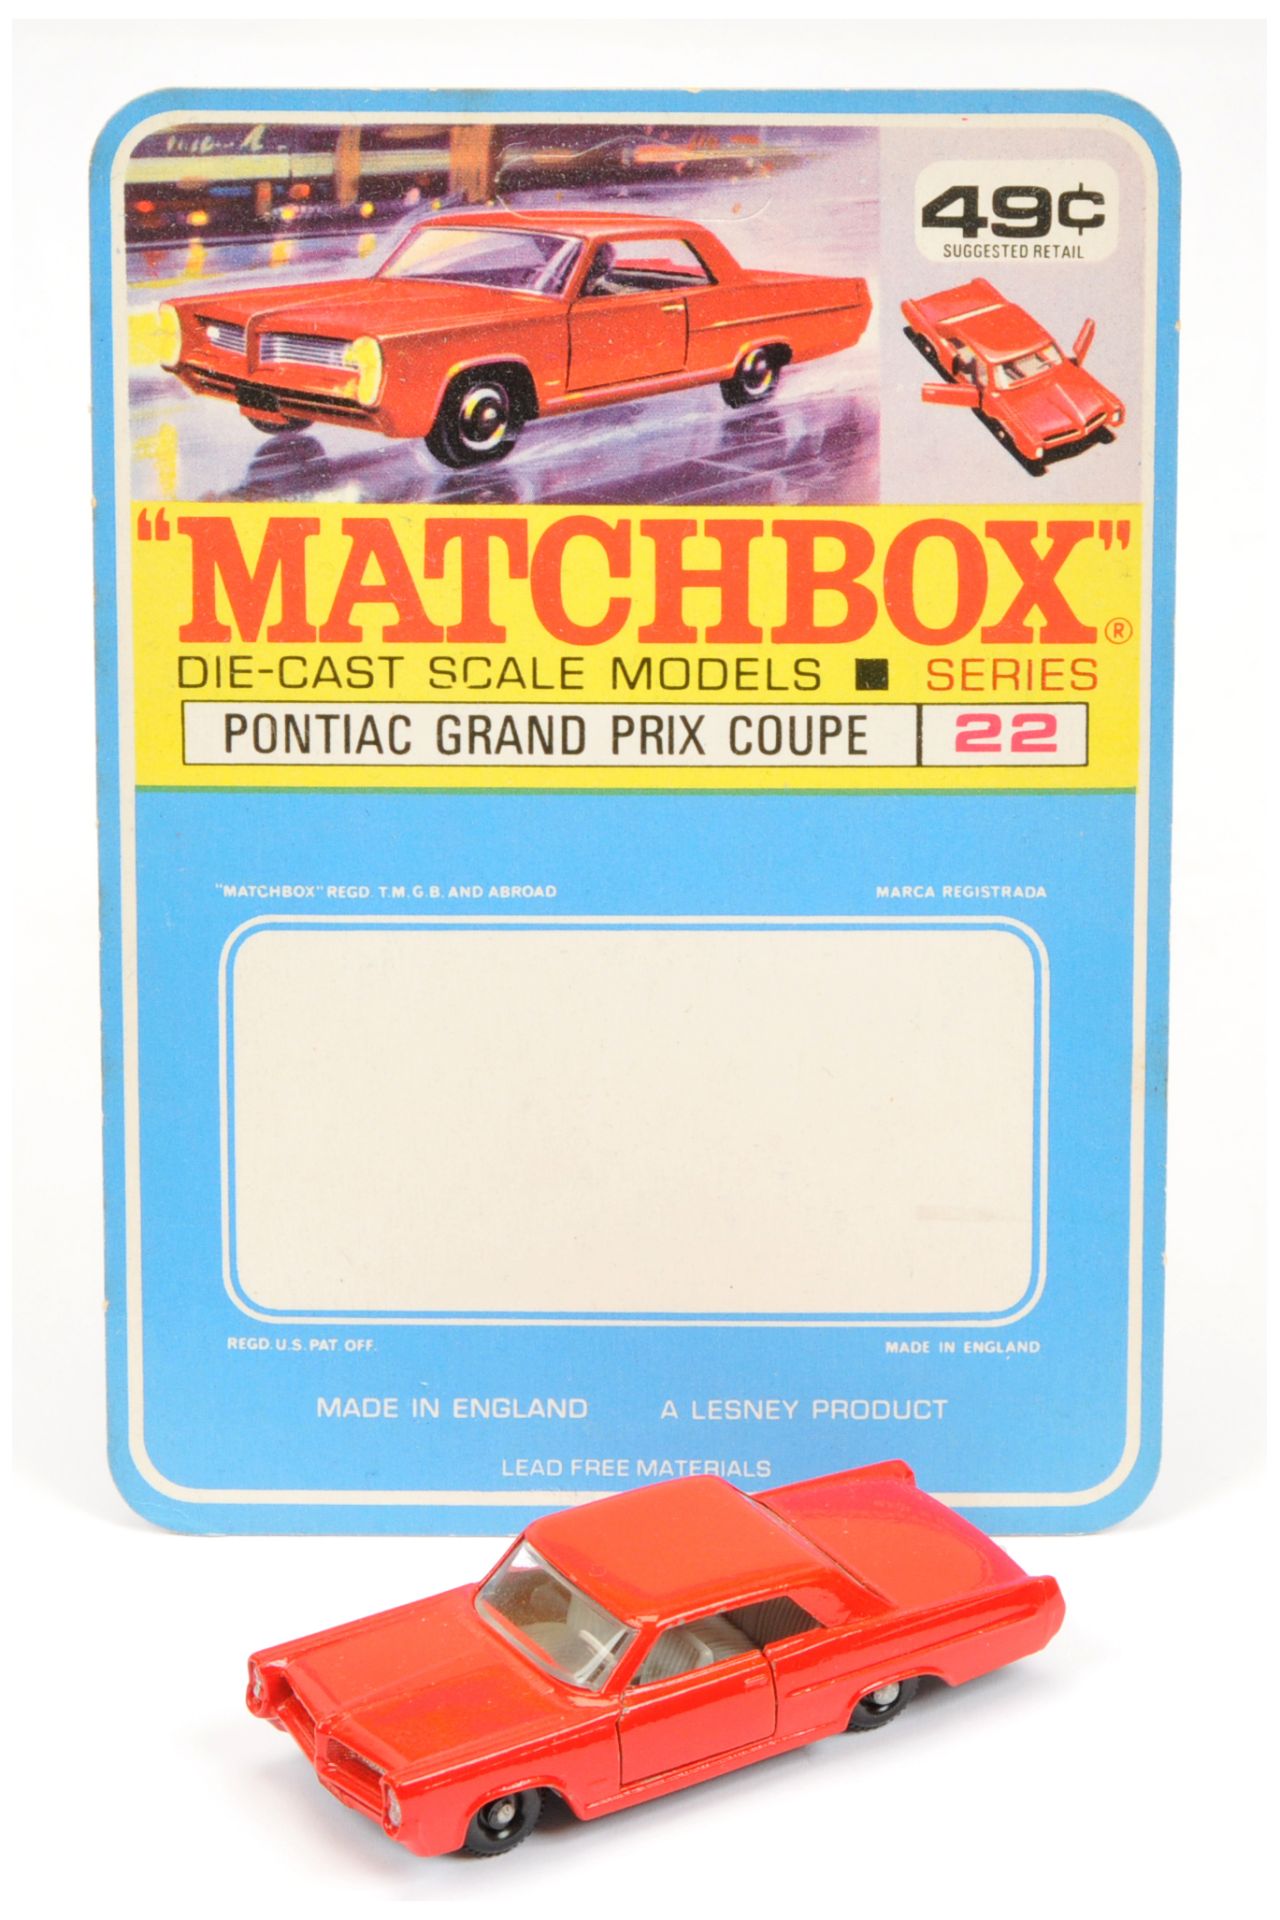 Matchbox Sample North American Market Blister Pack Backing Card for 22c Pontiac Grand Prix Coupe